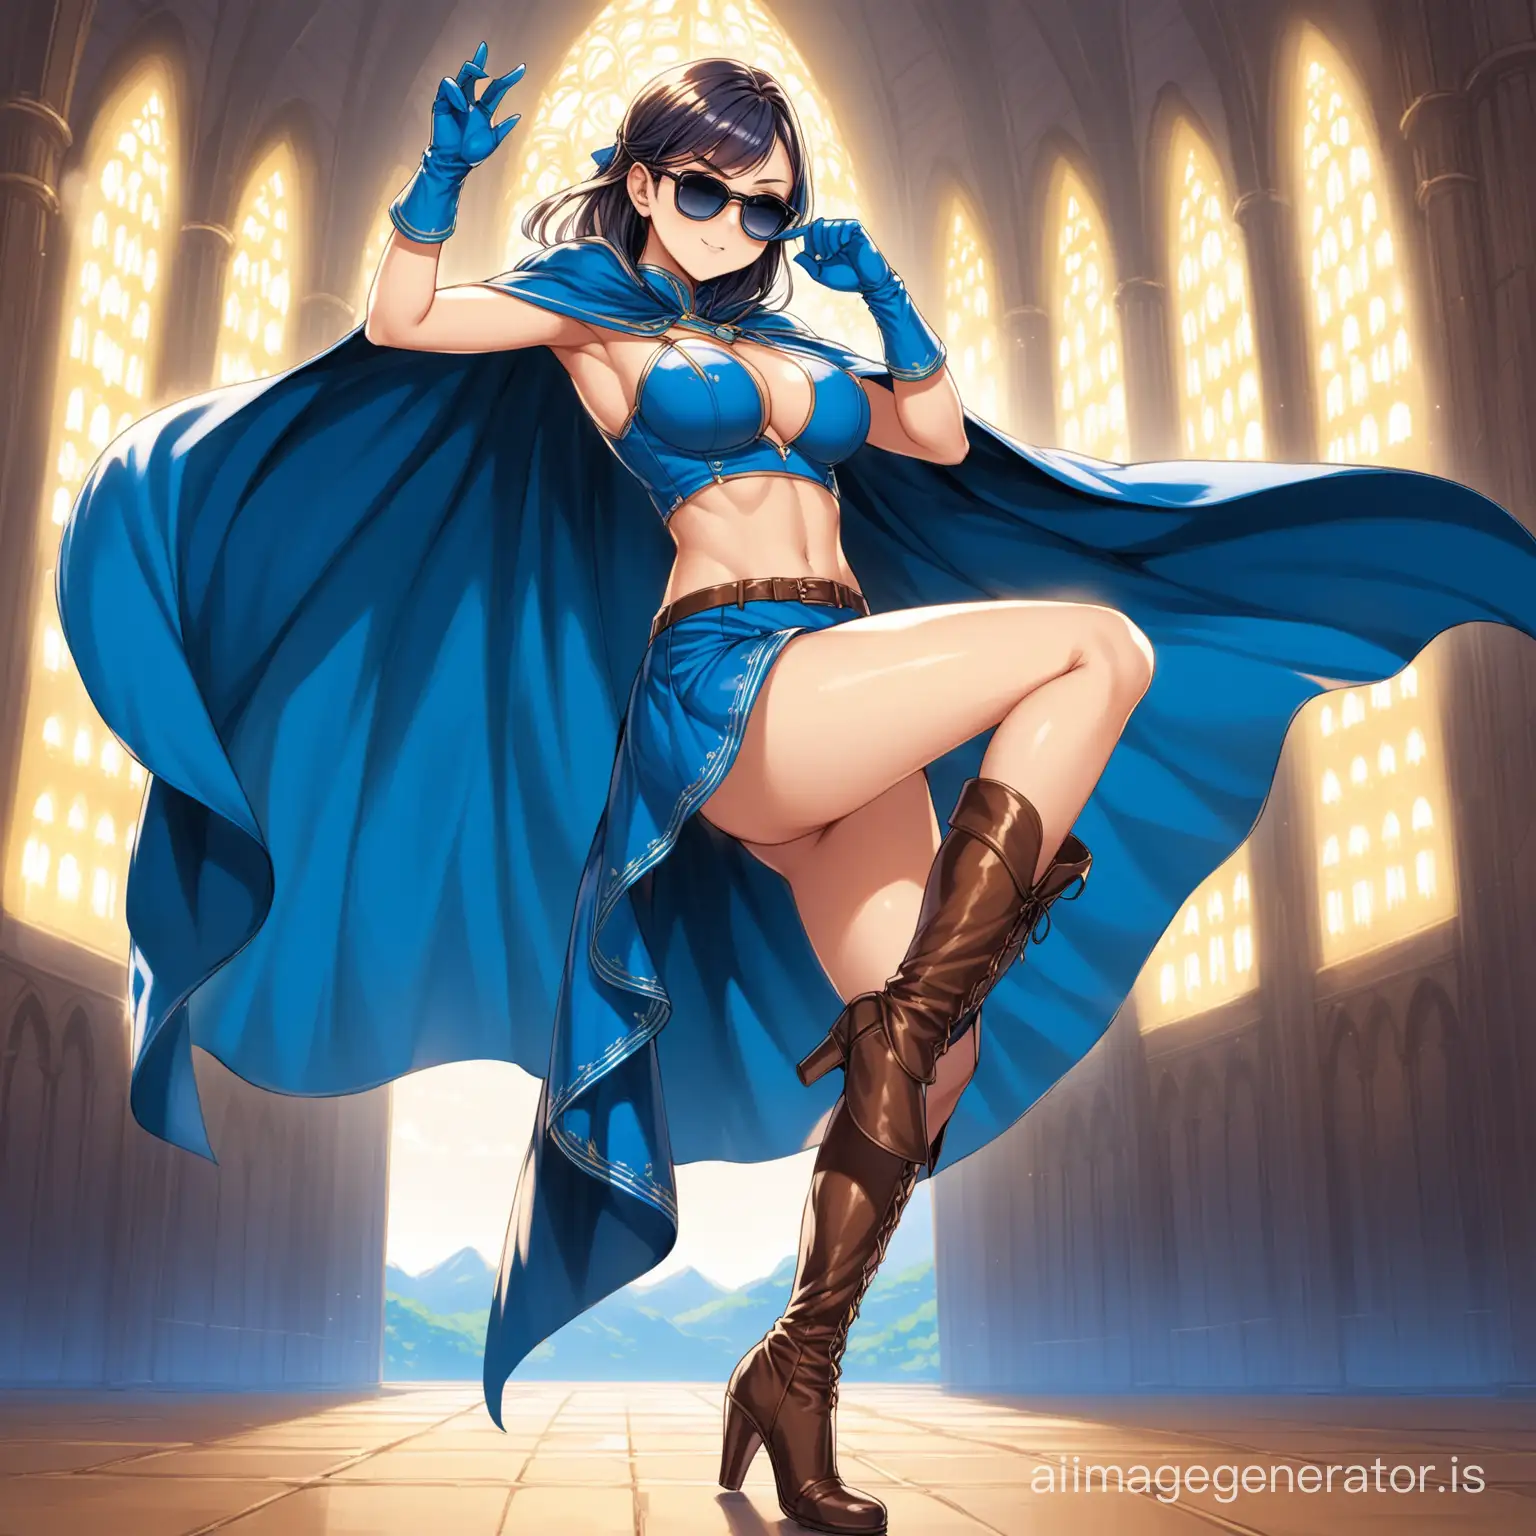 hot anime girl in a godly and sexy blue croptop, blue formal skirt wearing a pair of gloves, a pair of tall leather heeled boots, a cape reaching her legs and a pair of shades
she gives a cute pose